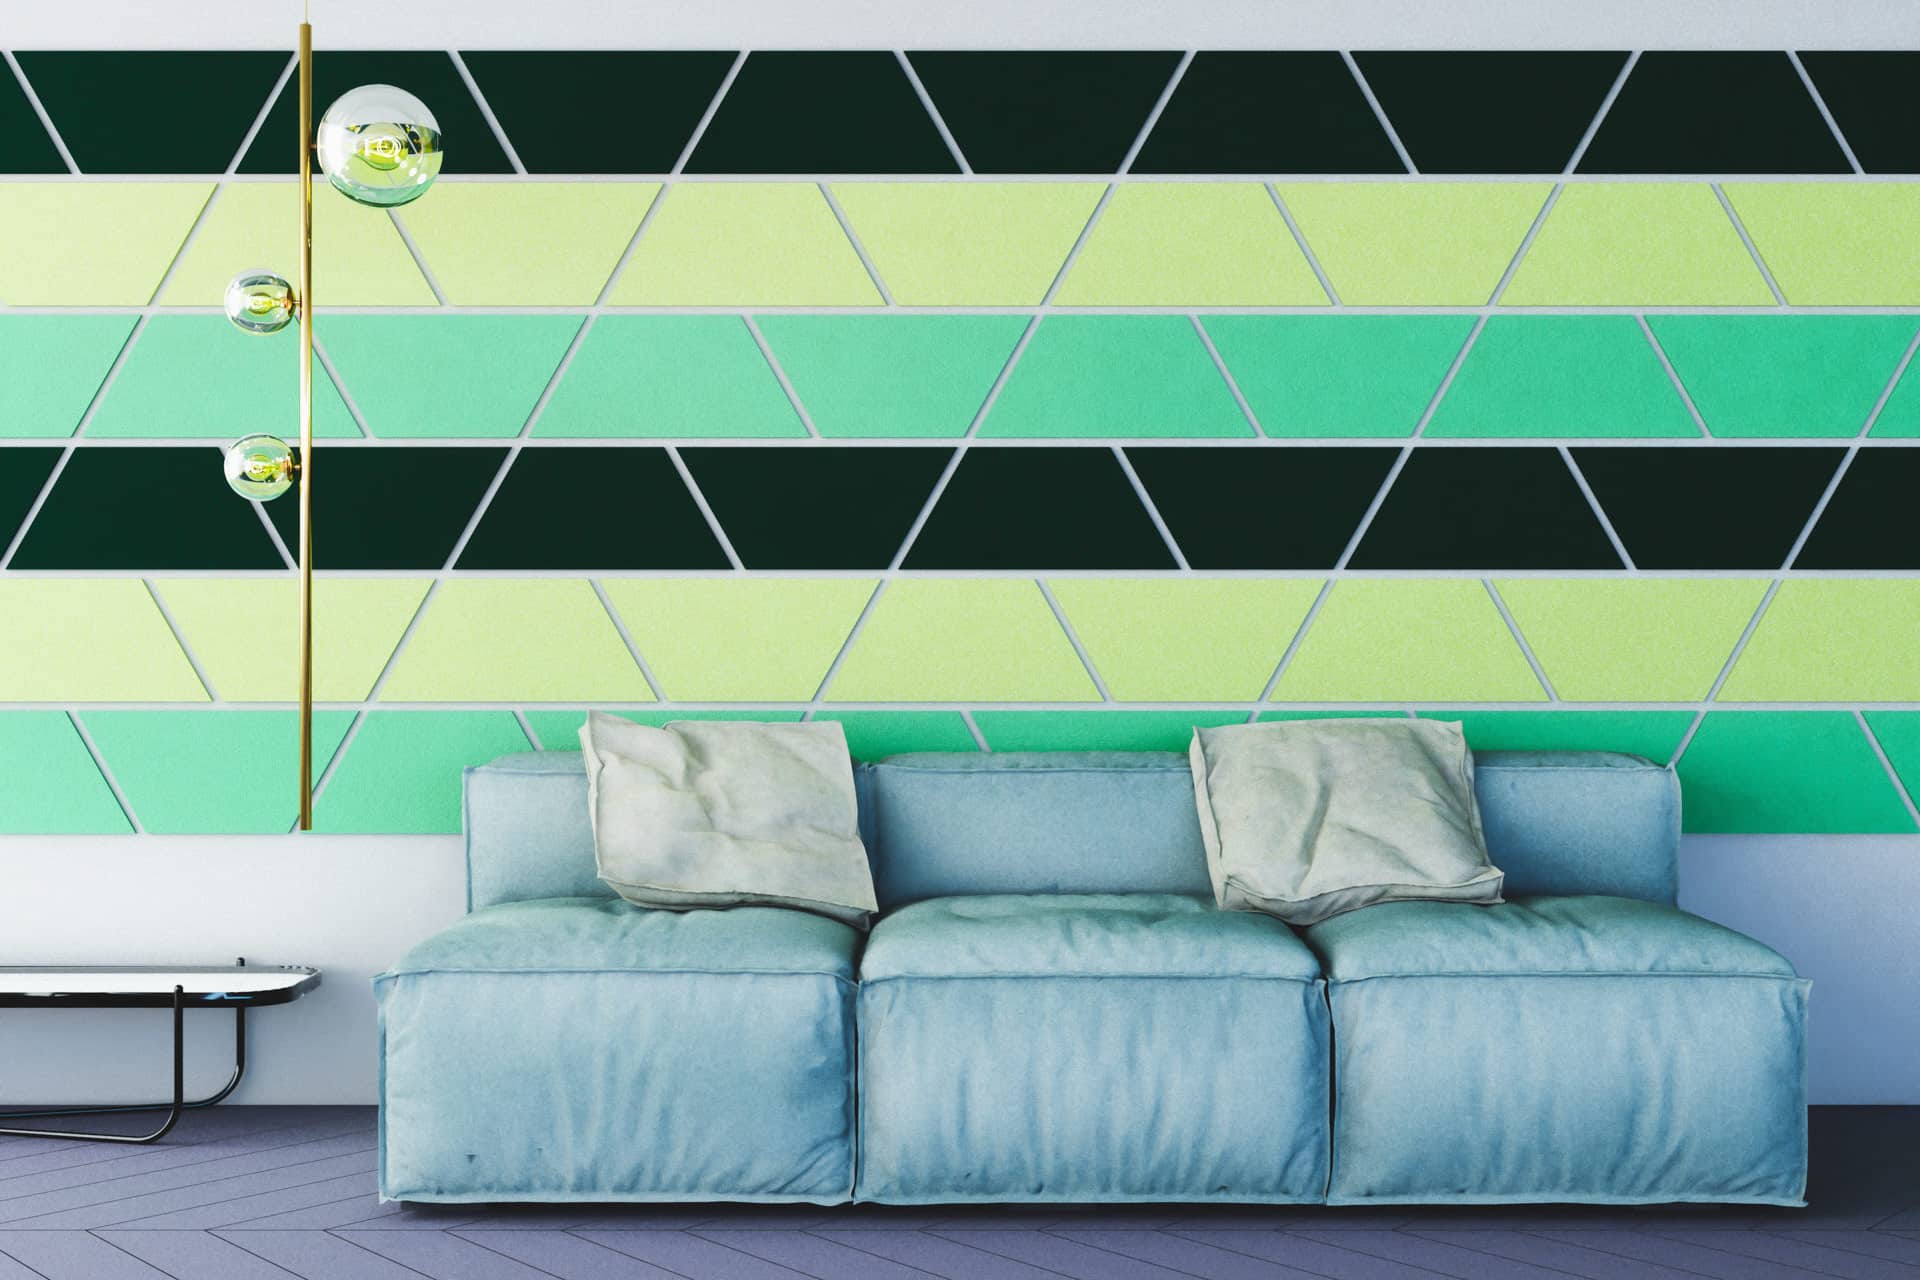 Composition of green tone 3d acoustic tiles on the wall in living room